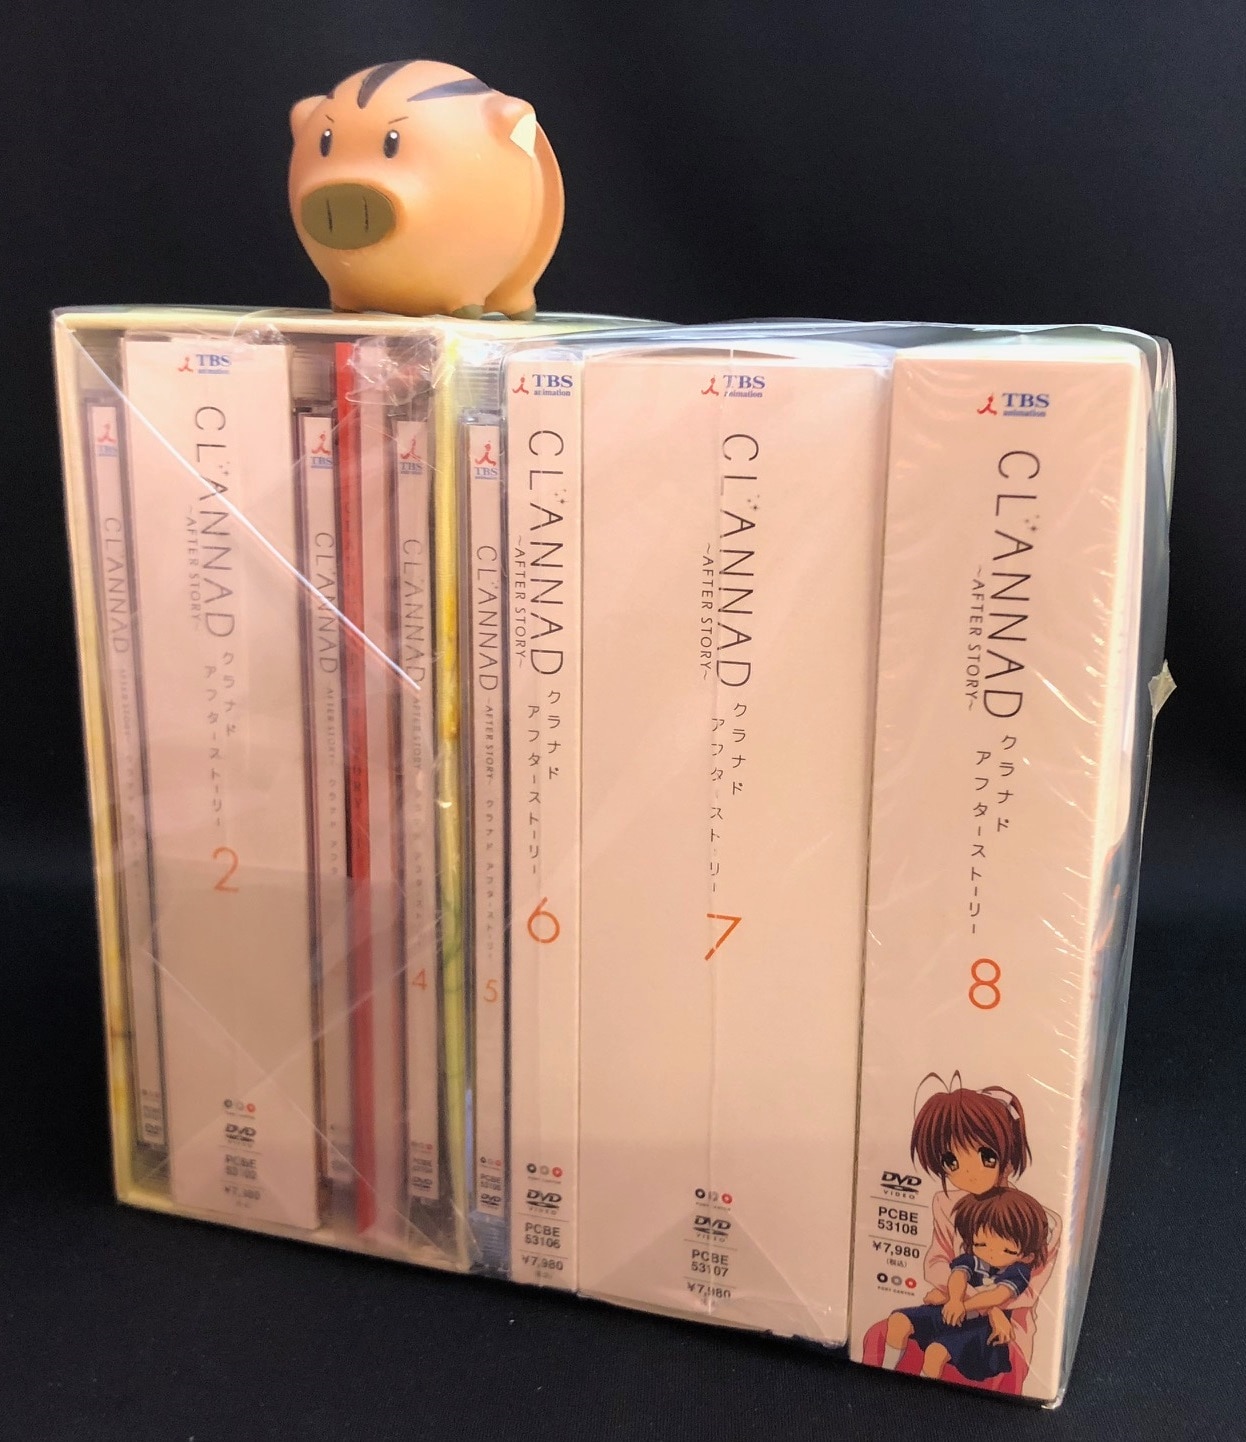 CLANNAD AFTER STORY 限定全8巻セット | まんだらけ Mandarake